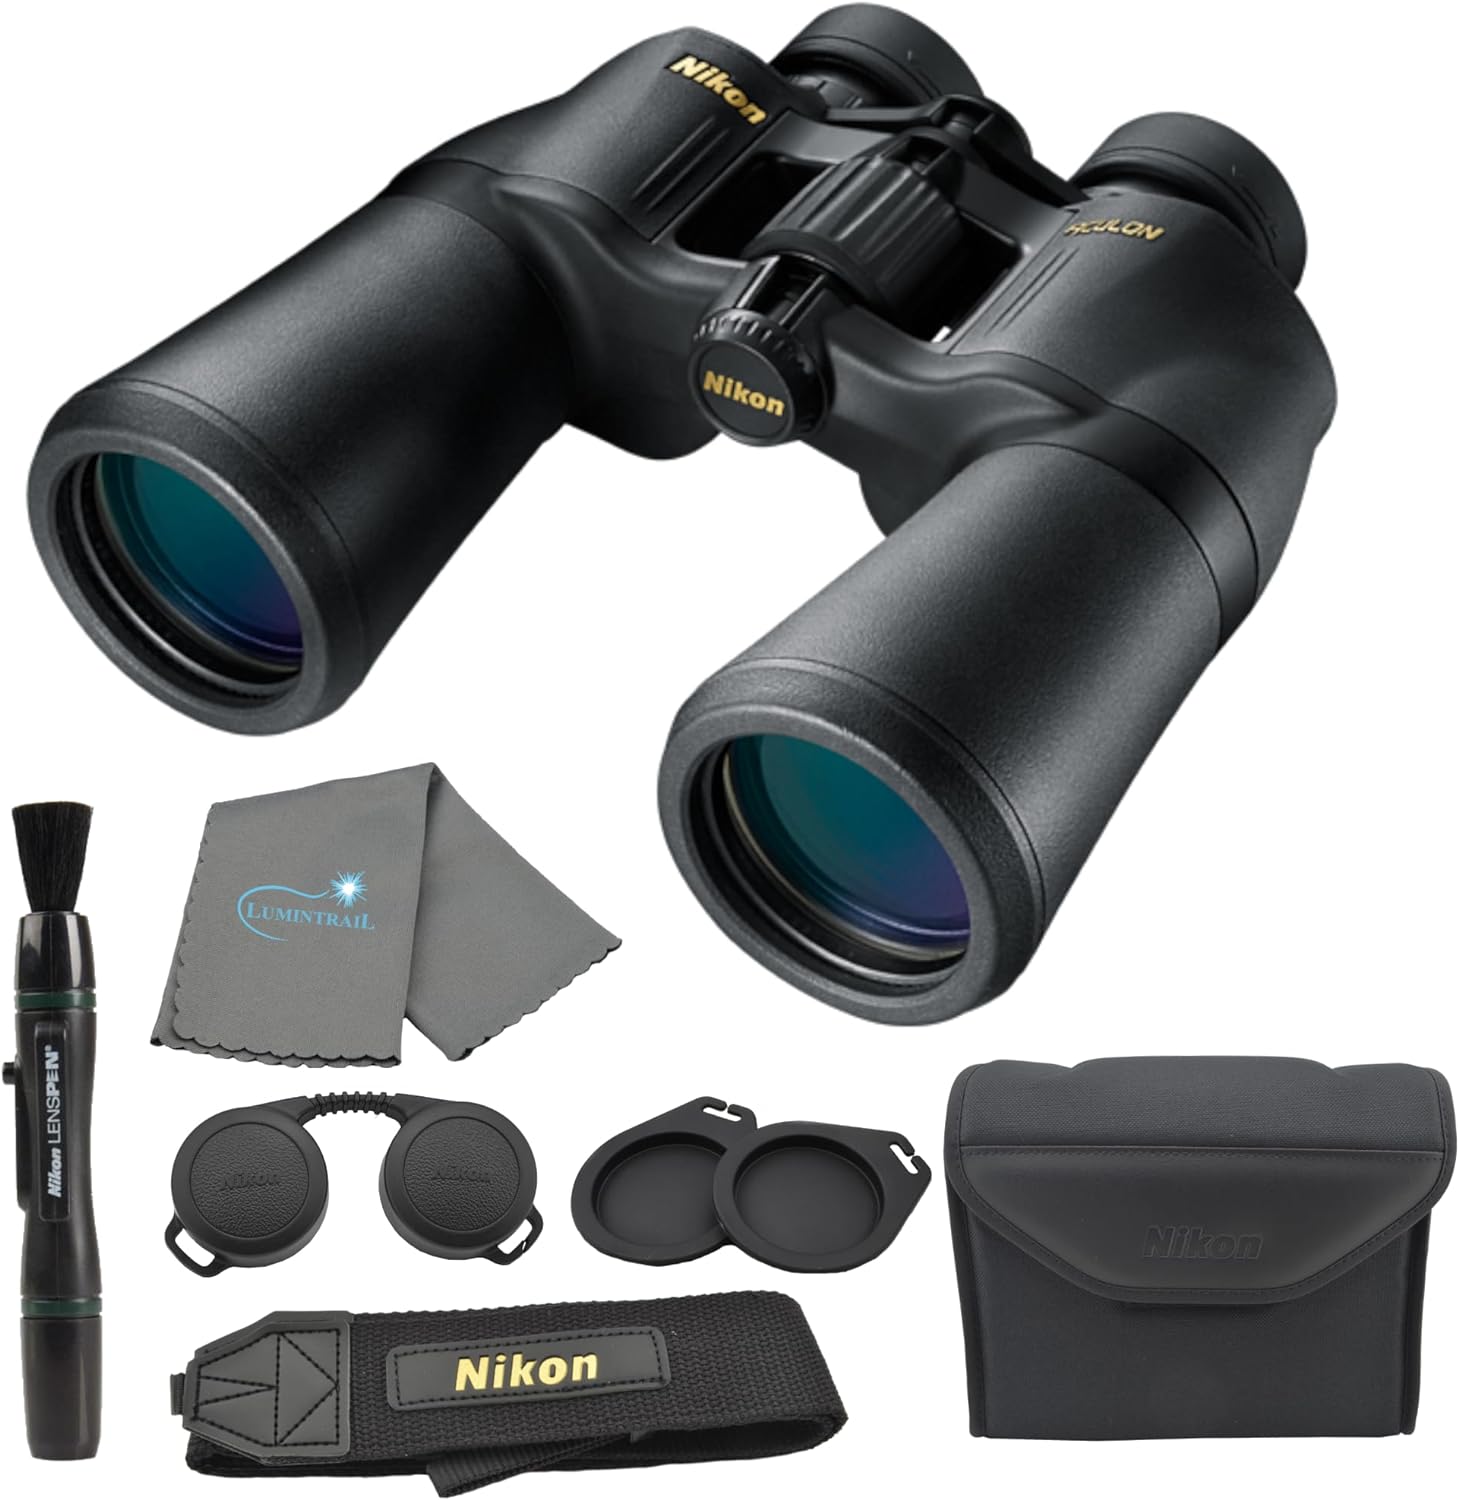 Nikon Aculon A211 10-22x50 Binoculars (8252) Black Bundle with Tripod Adapter, Nikon Lens Pen, Carry Case, Neck Strap, and Lens Cloth Compact for Adults for Bird Watching, Hunting, and Sporting